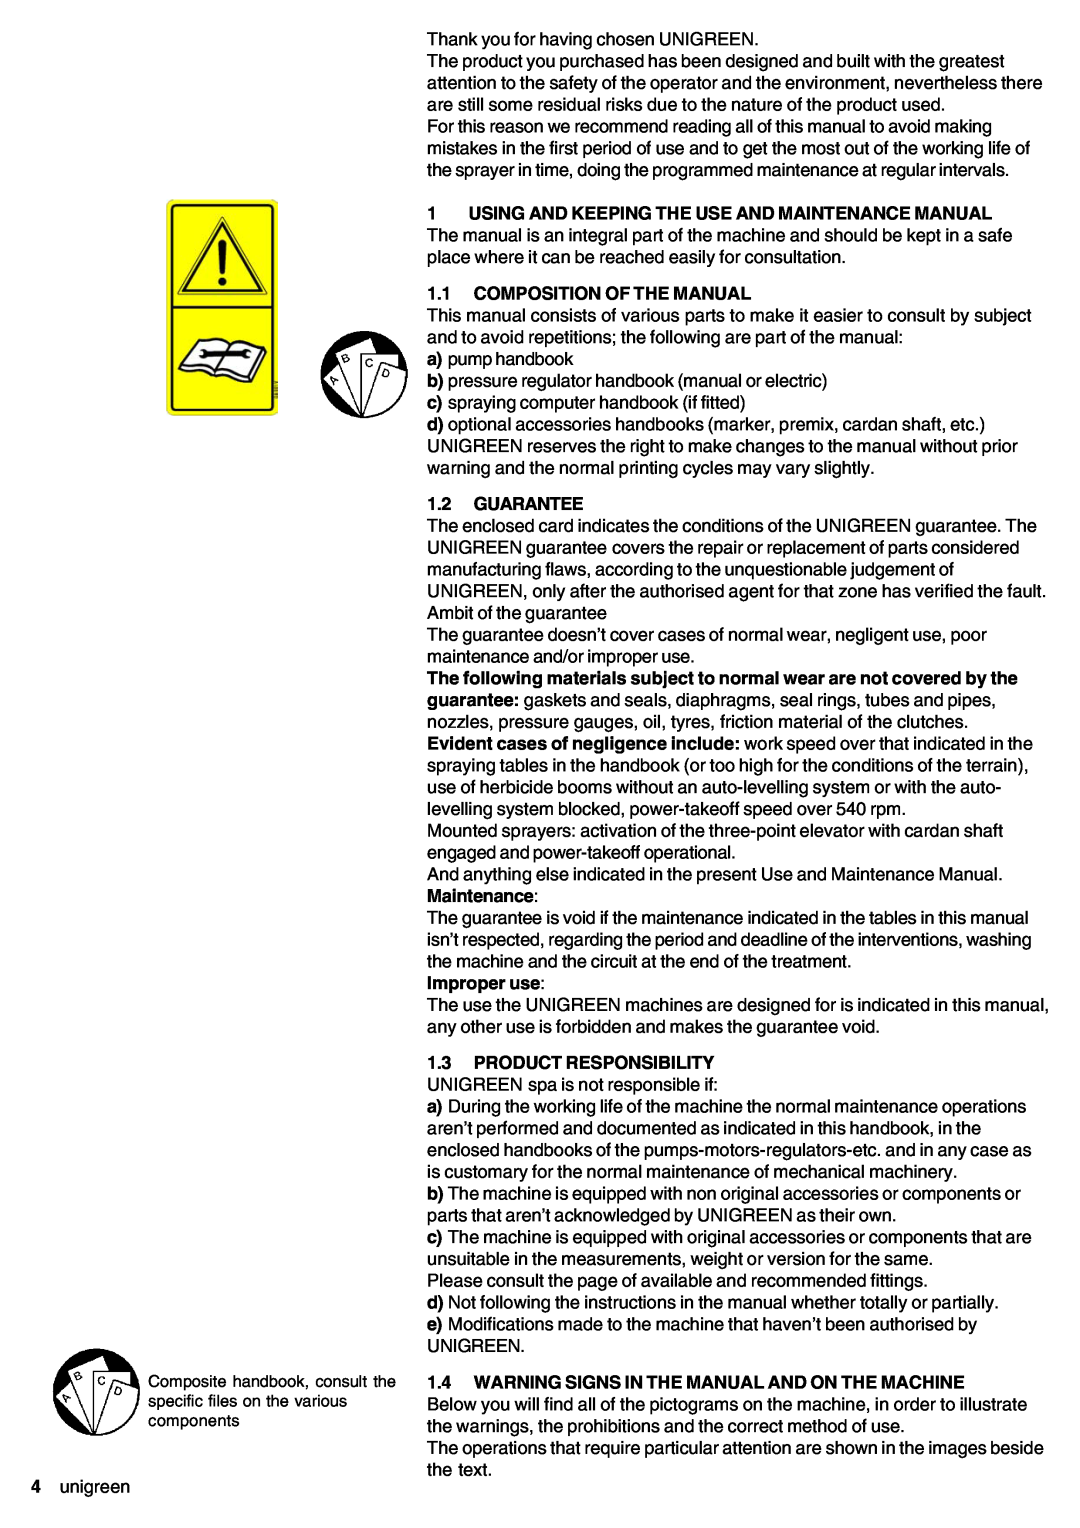 Unigreen 22 1.1COMPOSITION OF THE MANUAL, 1.2GUARANTEE, Improper use, 1.4WARNING SIGNS IN THE MANUAL AND ON THE MACHINE 